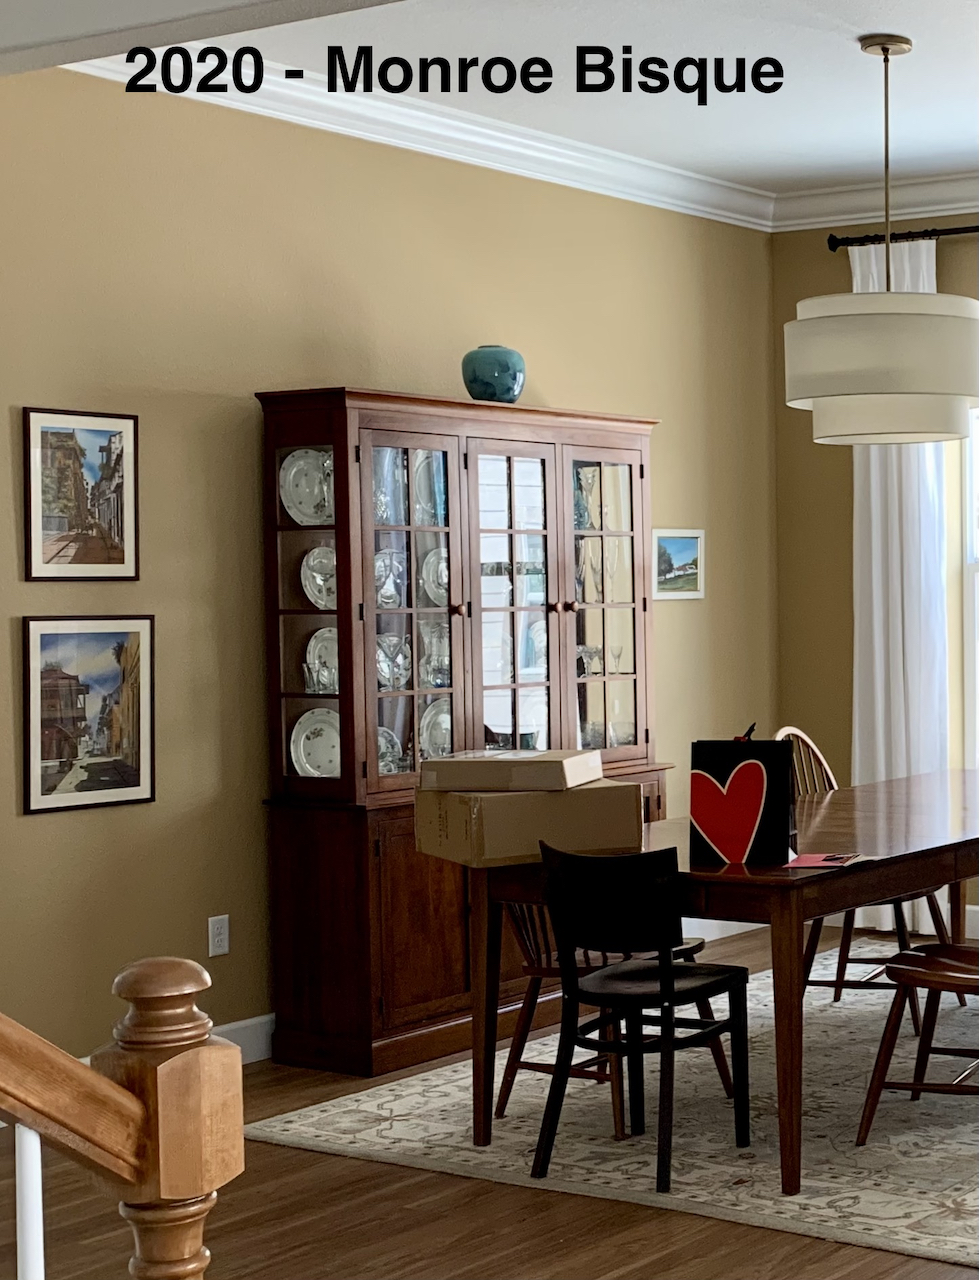 A dining room wall with Monroe Bisque paint color.